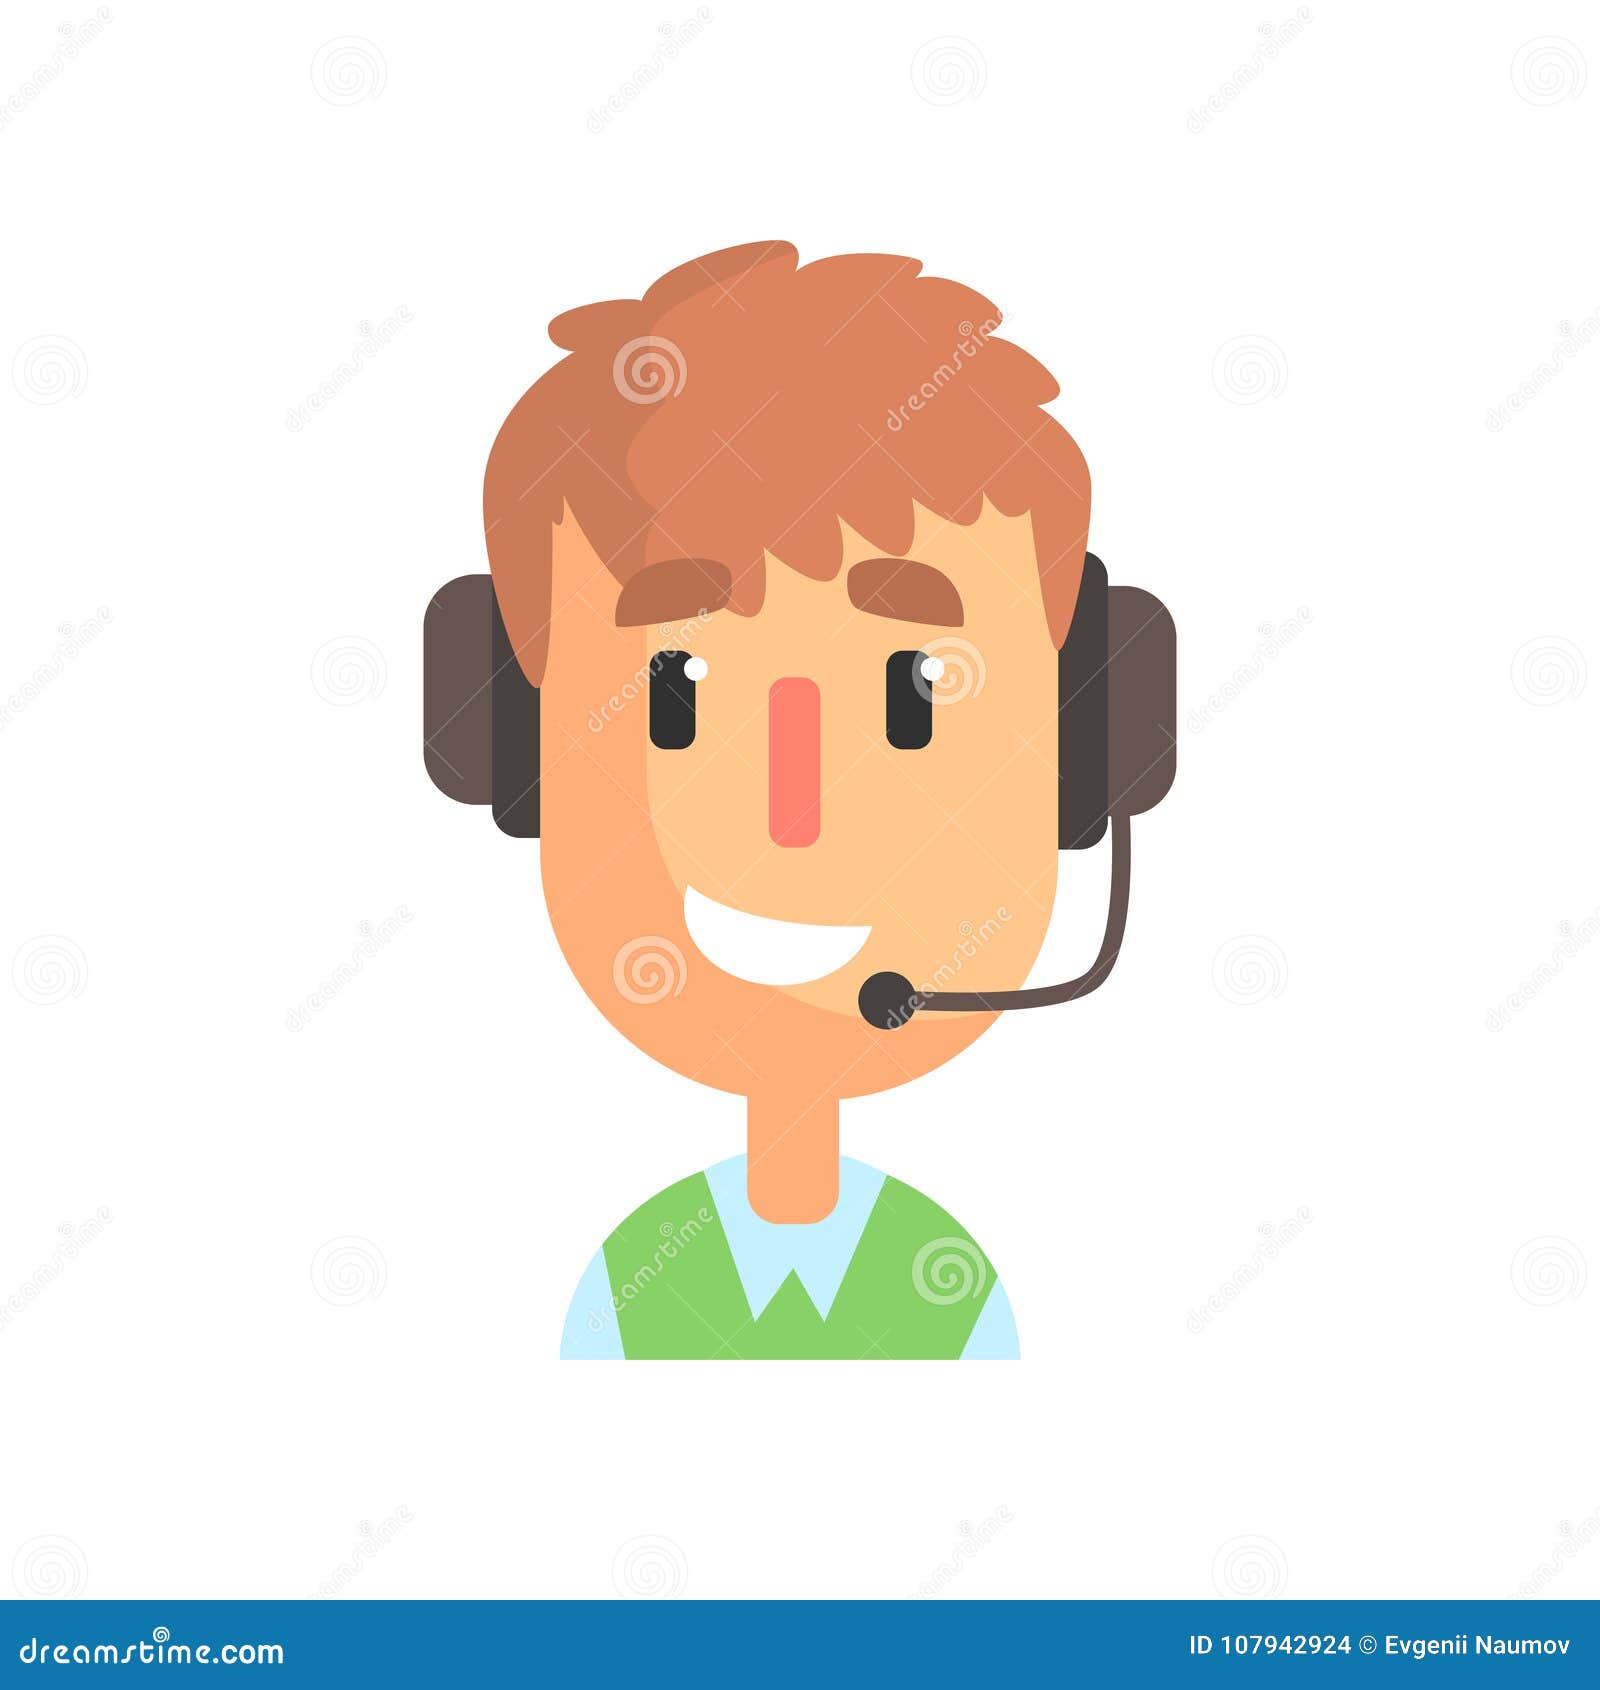 Smiling Male Call Center Worker, Online Customer Support Service Assistant  with Headphones Cartoon Vector Illustration Stock Vector - Illustration of  office, avatar: 107942924